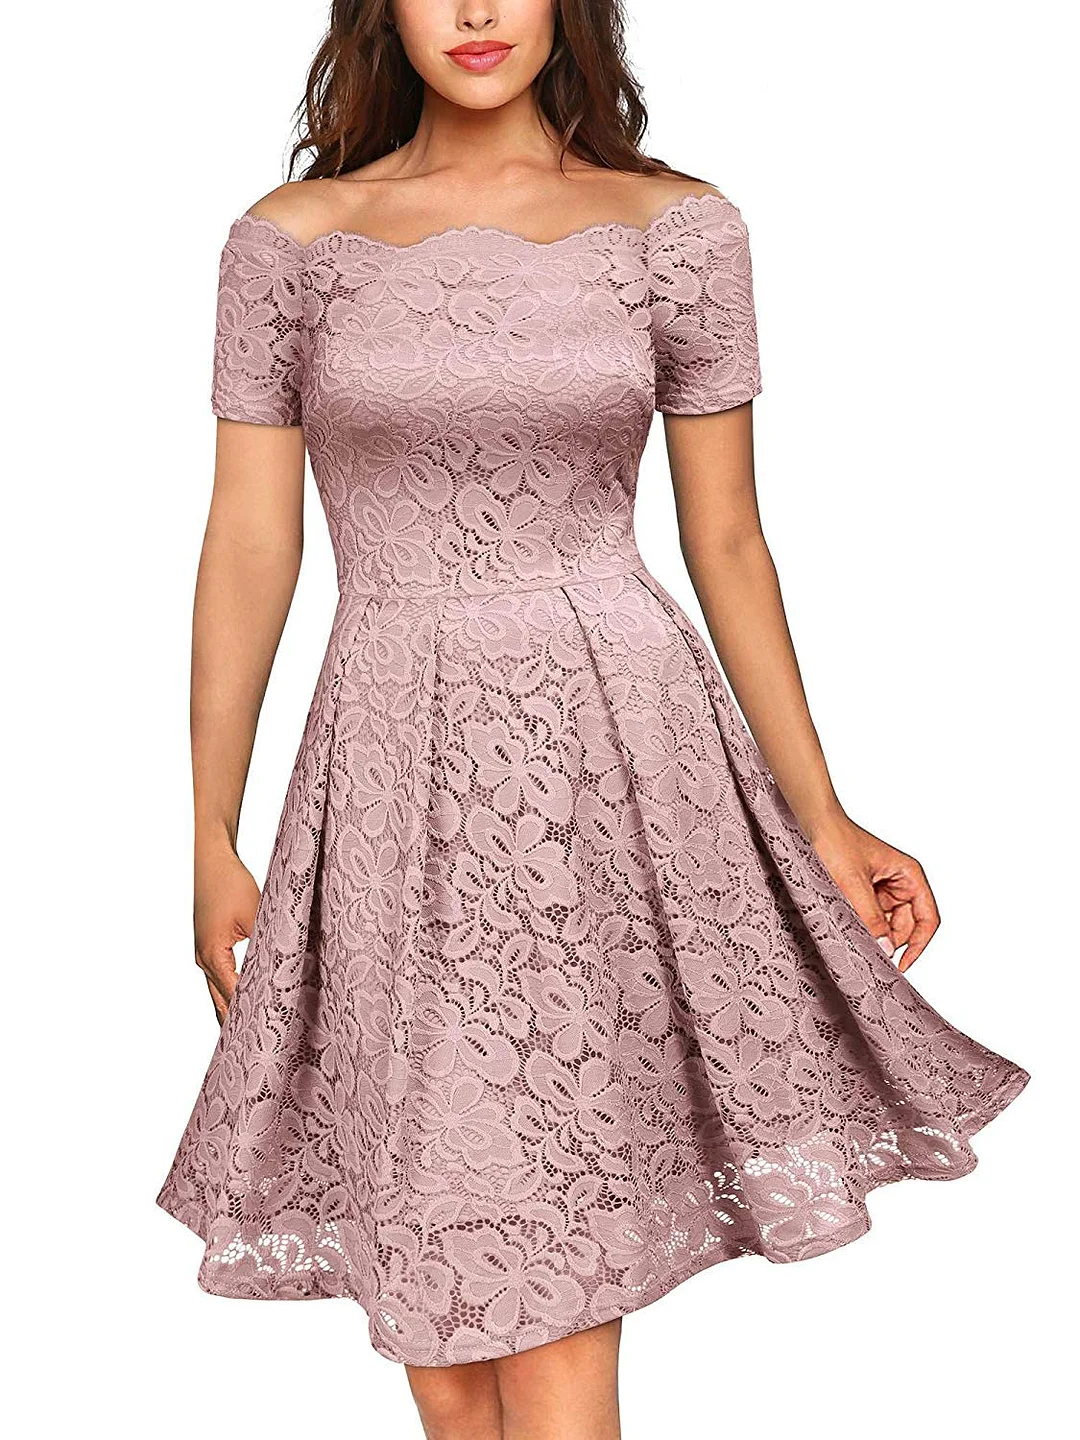 Women's Vintage Floral Lace Short Sleeve Boat Neck Cocktail Party Swing Dress